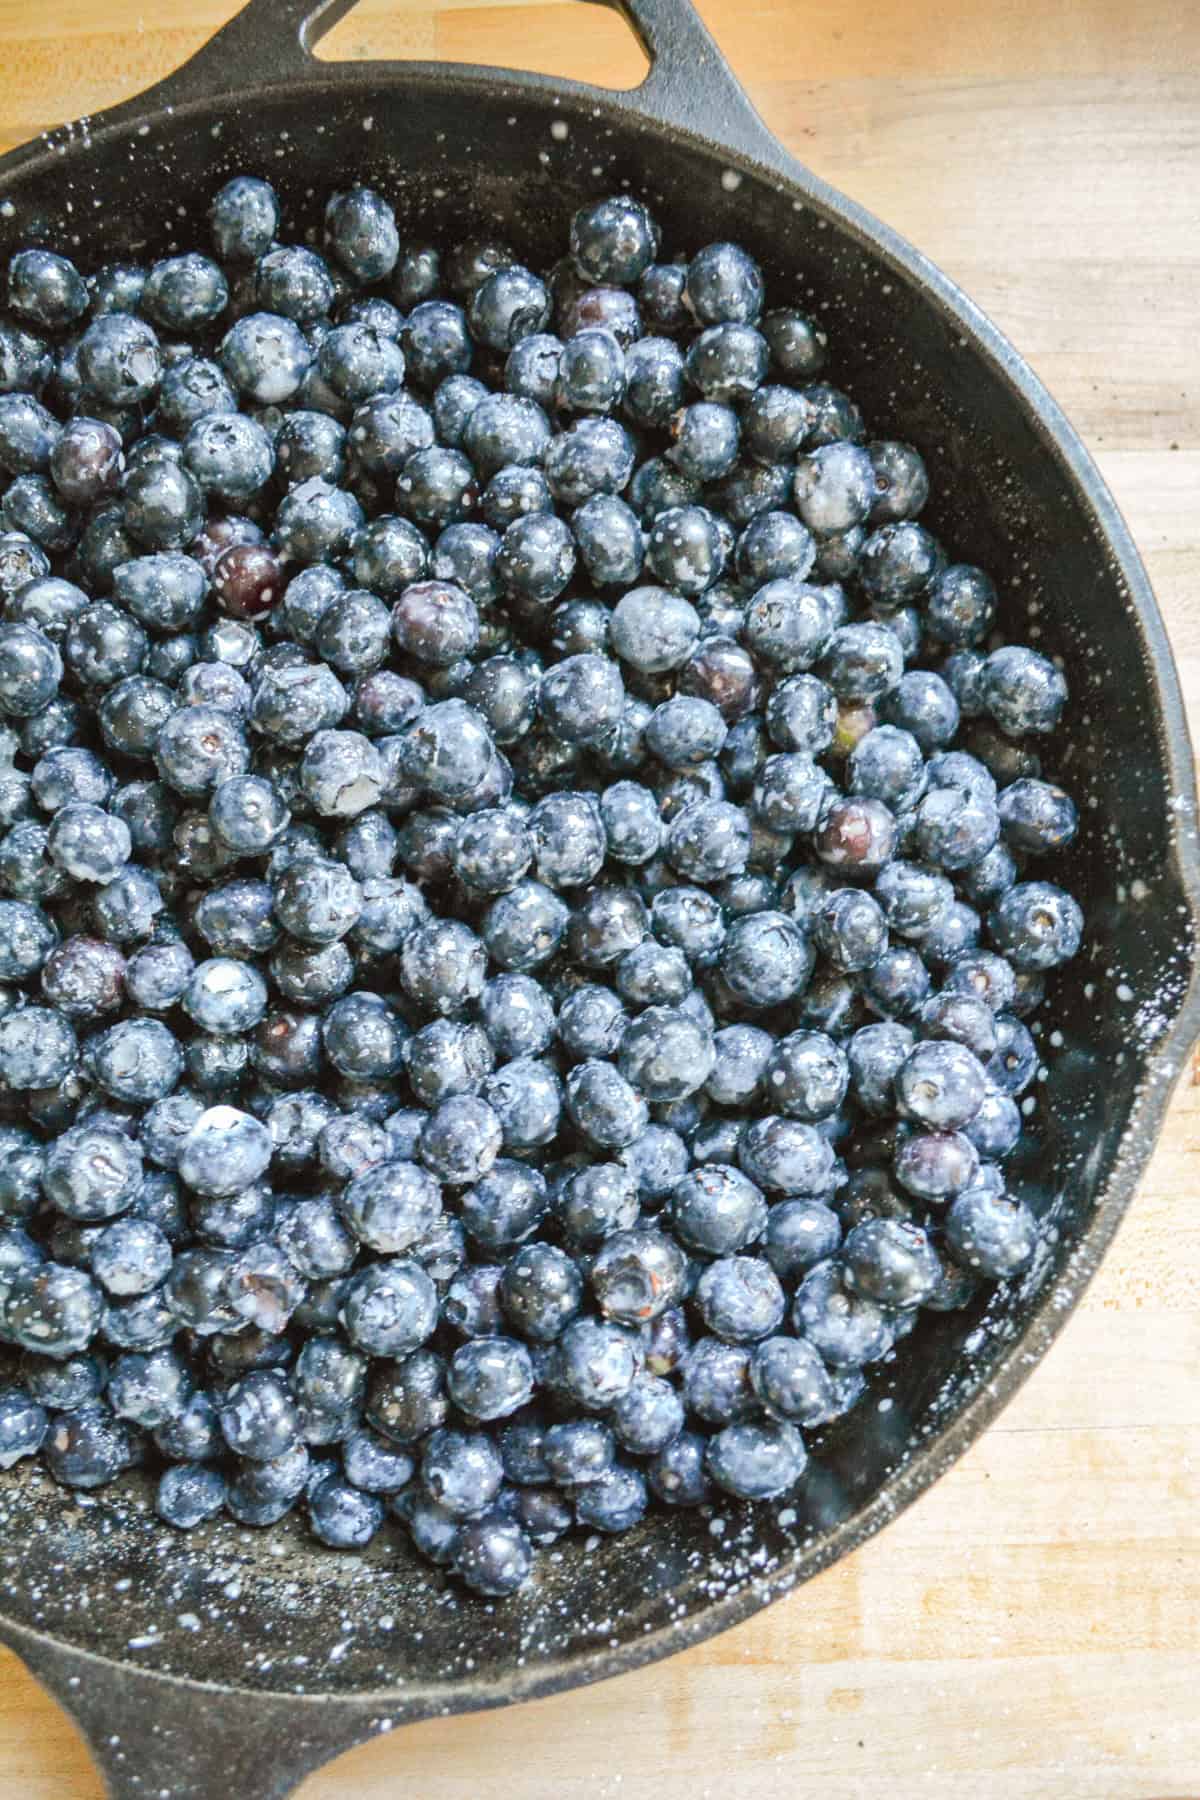 Blueberries all mixed together with sugar and cornstarch in a cast iron skillet.